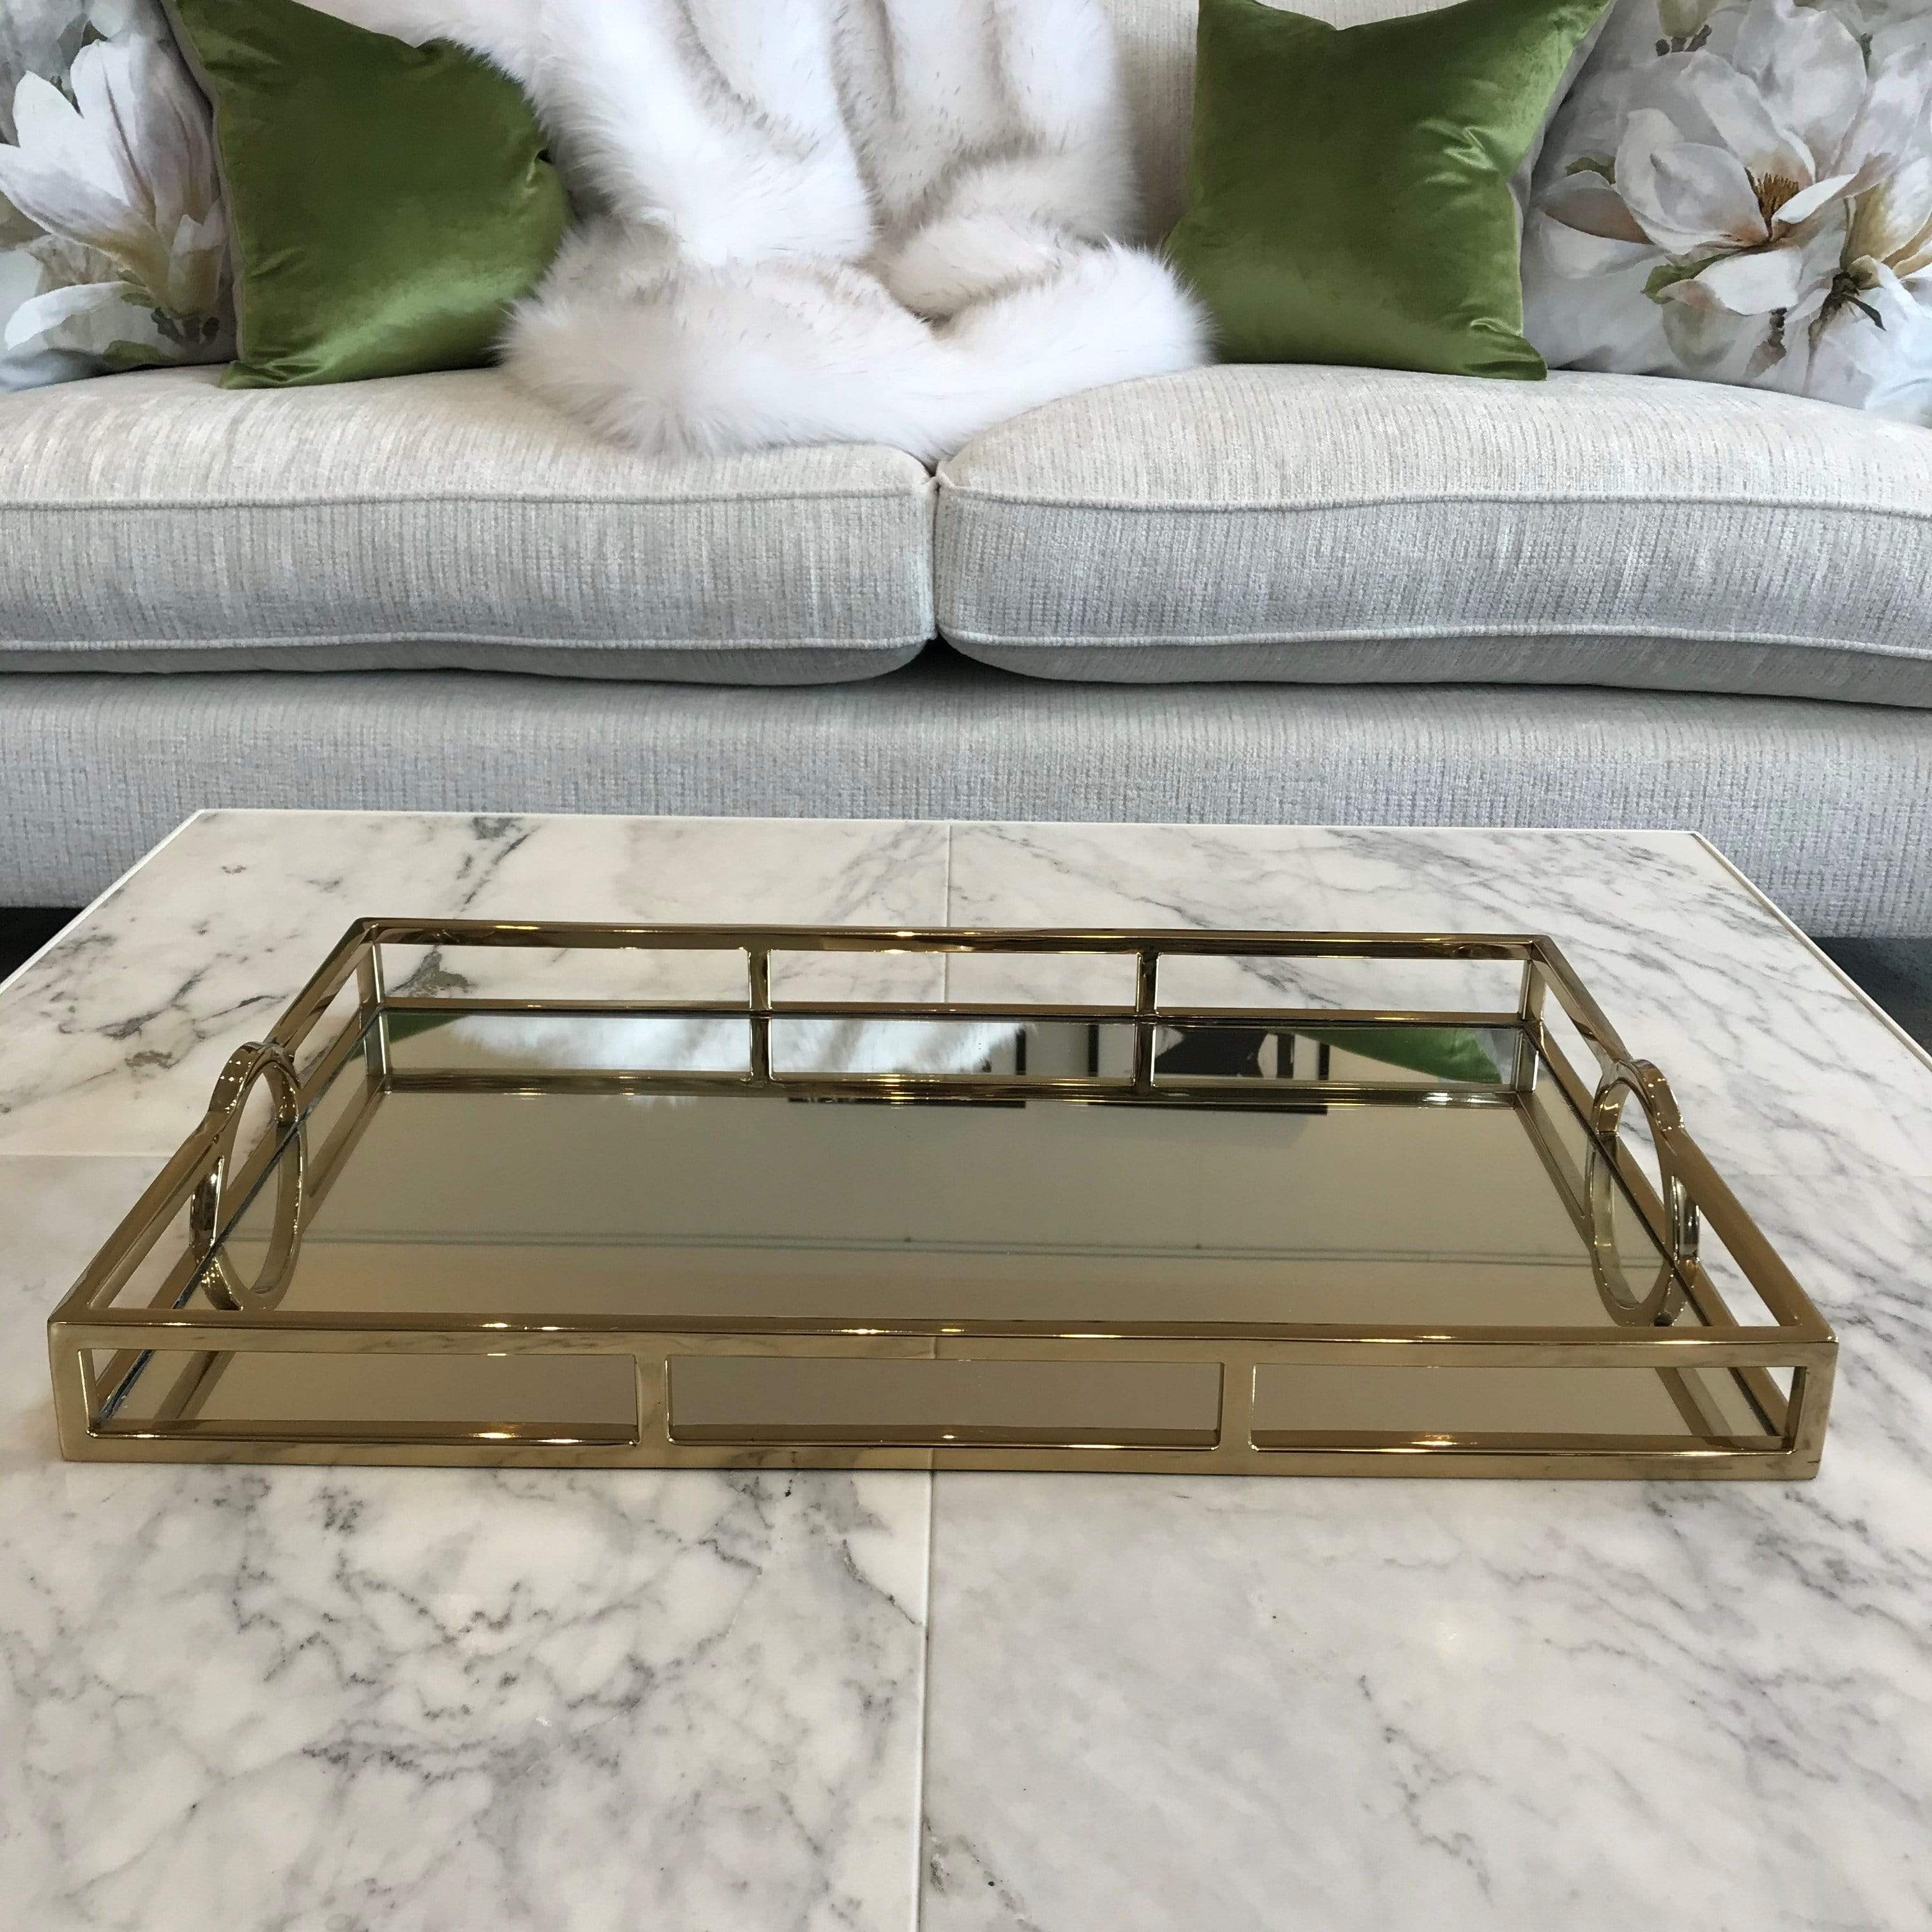 Gaudion Furniture Tray 1 x Gold Mirror Tray Tray Mirrored Gold